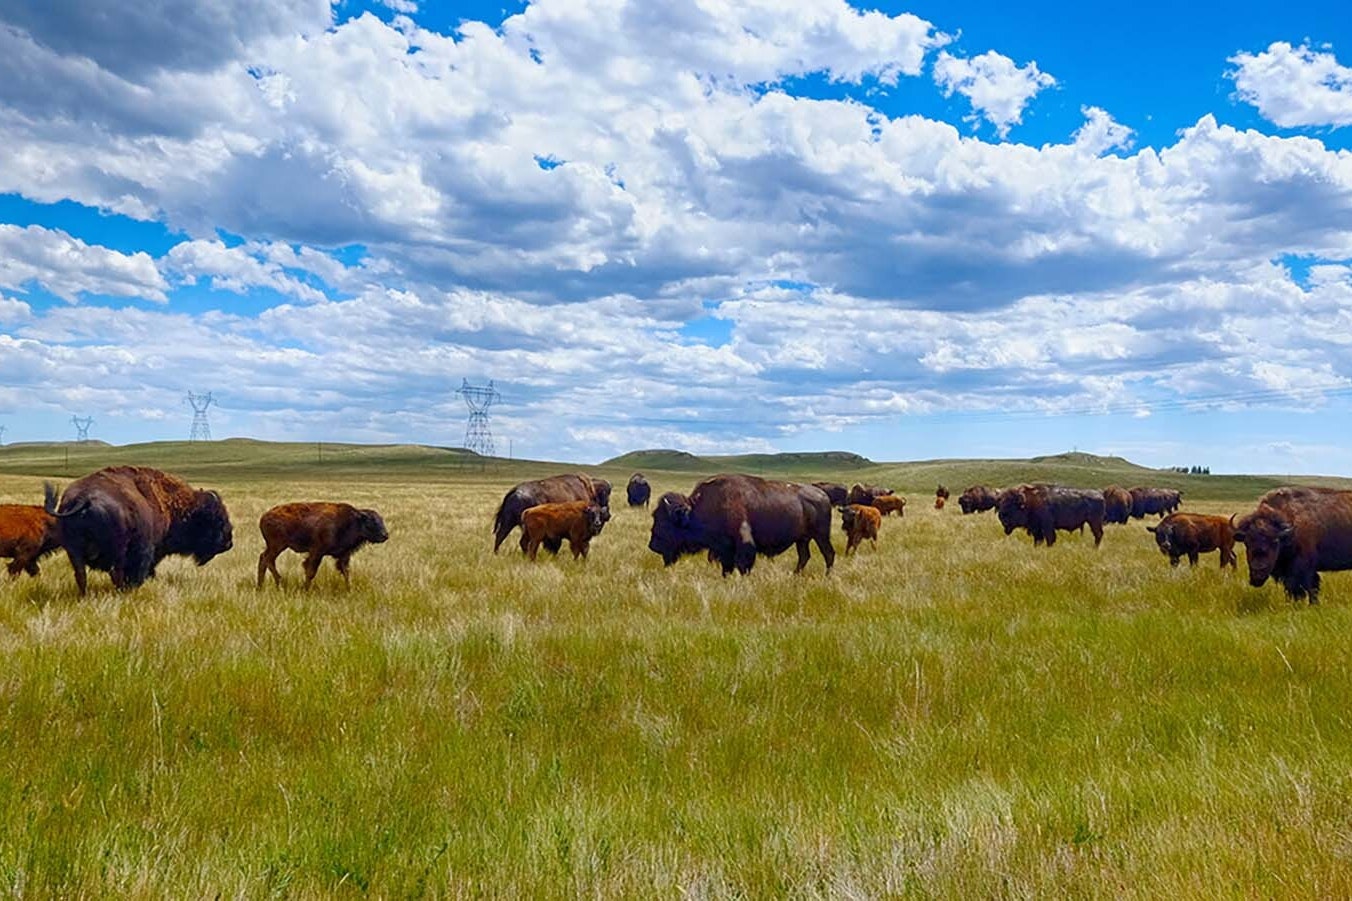 Officials in Montana, Wyoming and other places around the West are frustrated by a lack of information from the federal government about plans to reintroduce wild bison.